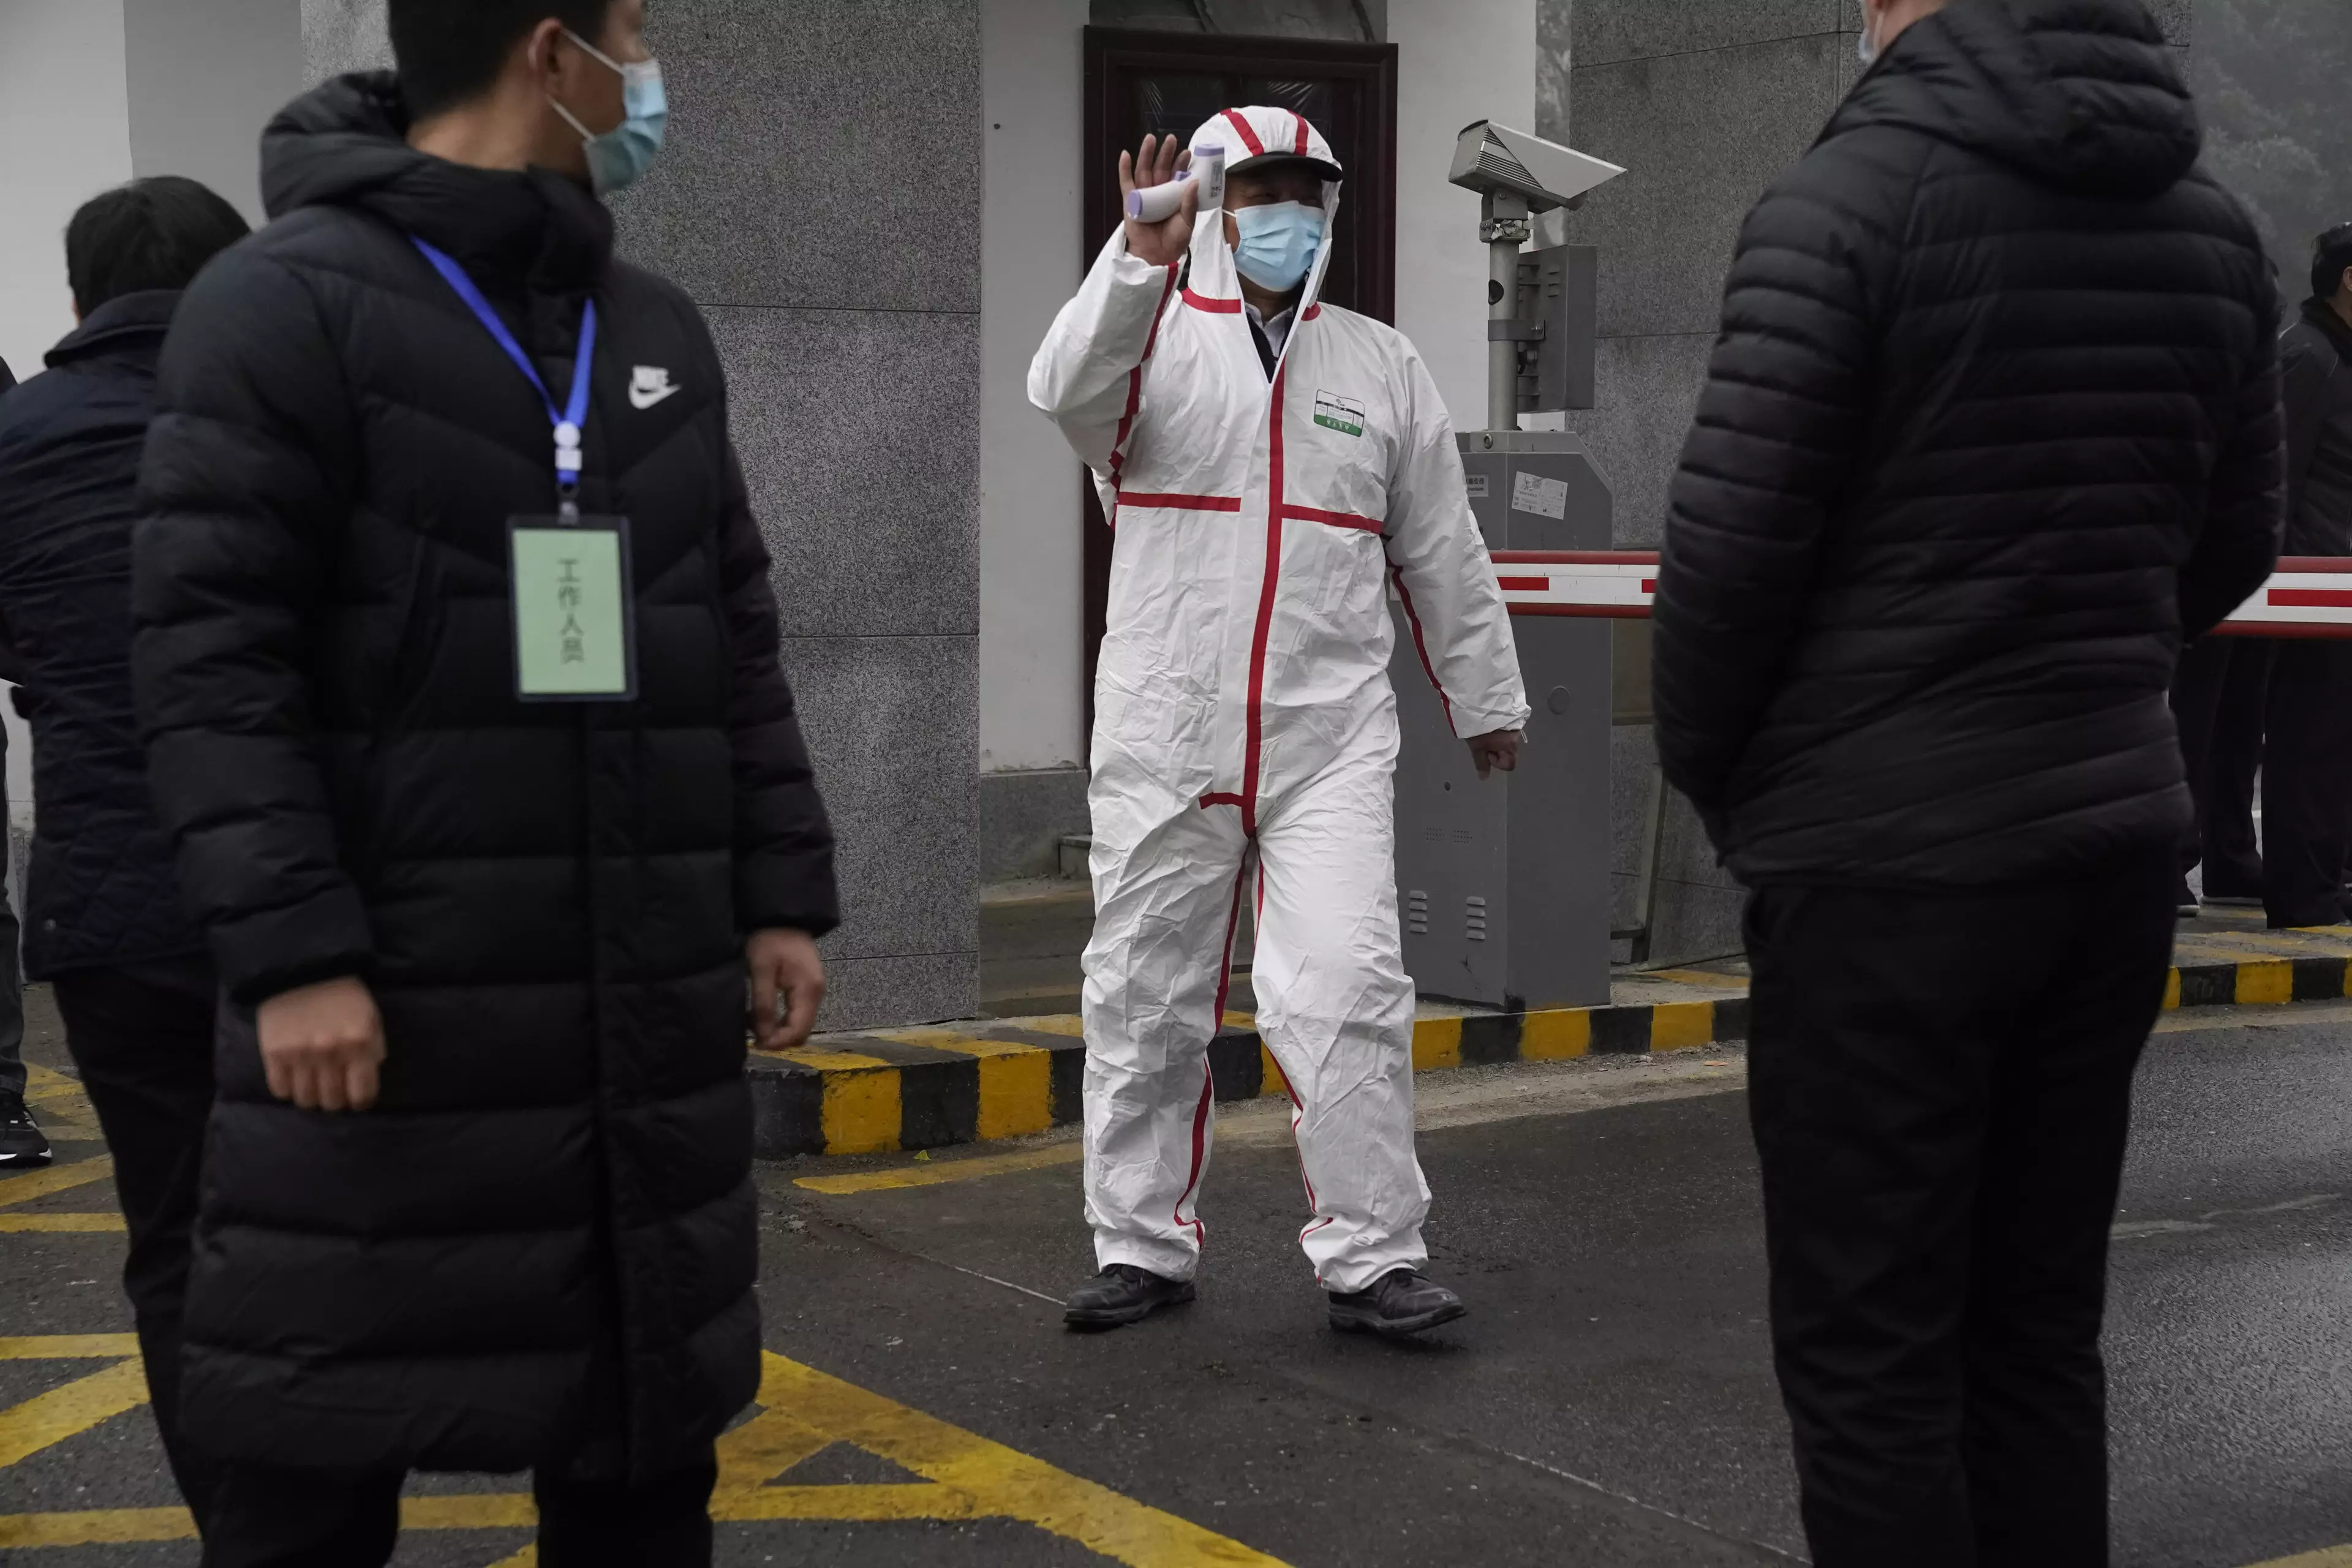 Marion Koopmans of a World Health Organization team arrives at the Hubei Center for Disease Control and Prevention in Wuhan.